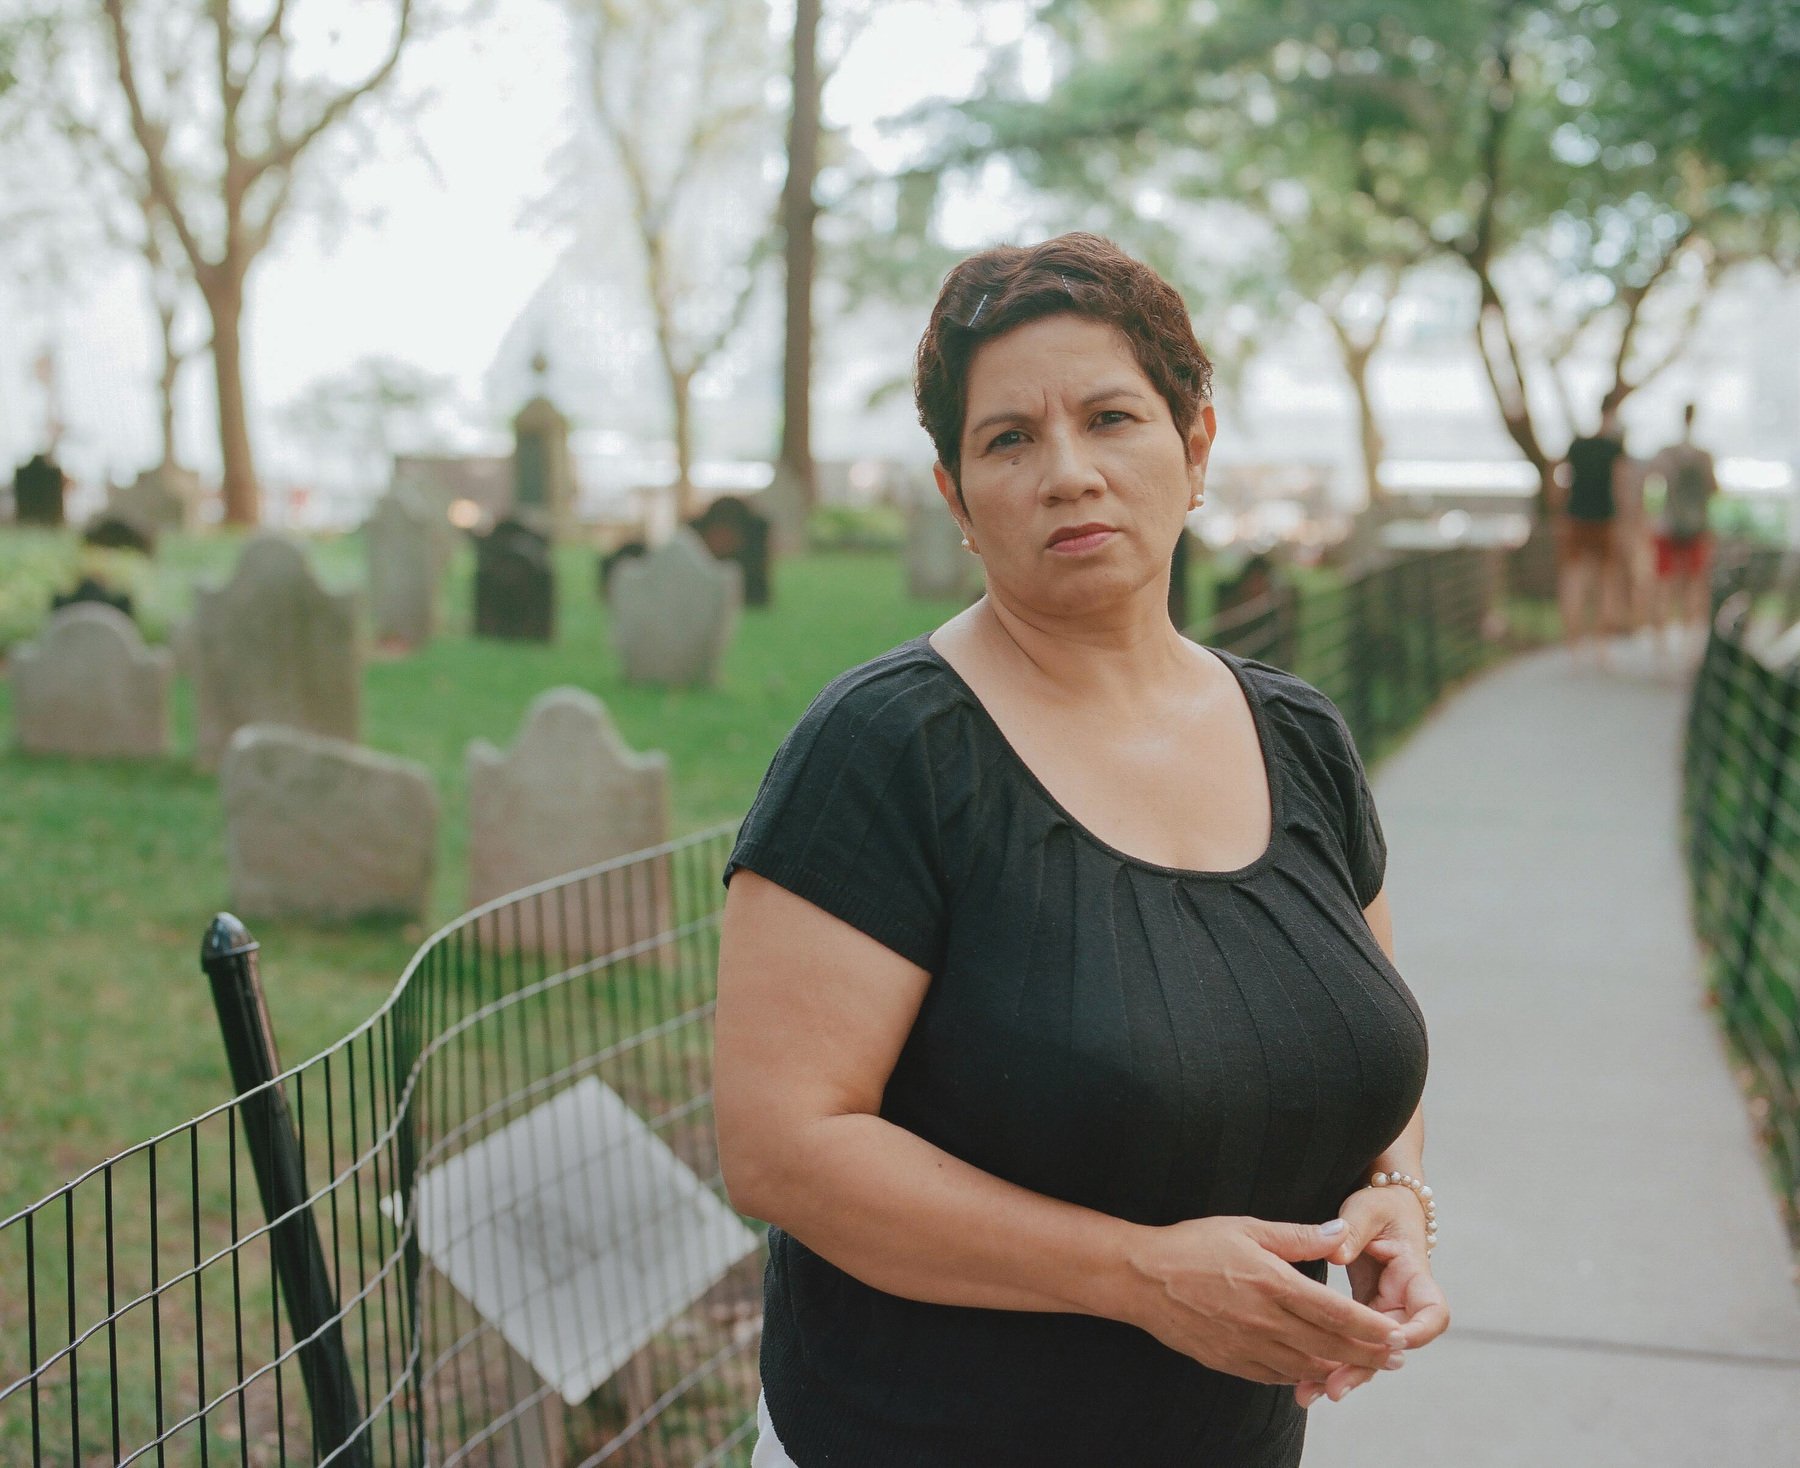 Julia, 51, Works in imports and exports, New York, New York (Photographed at a cemetery adjacent to ground zero in Manhattan)